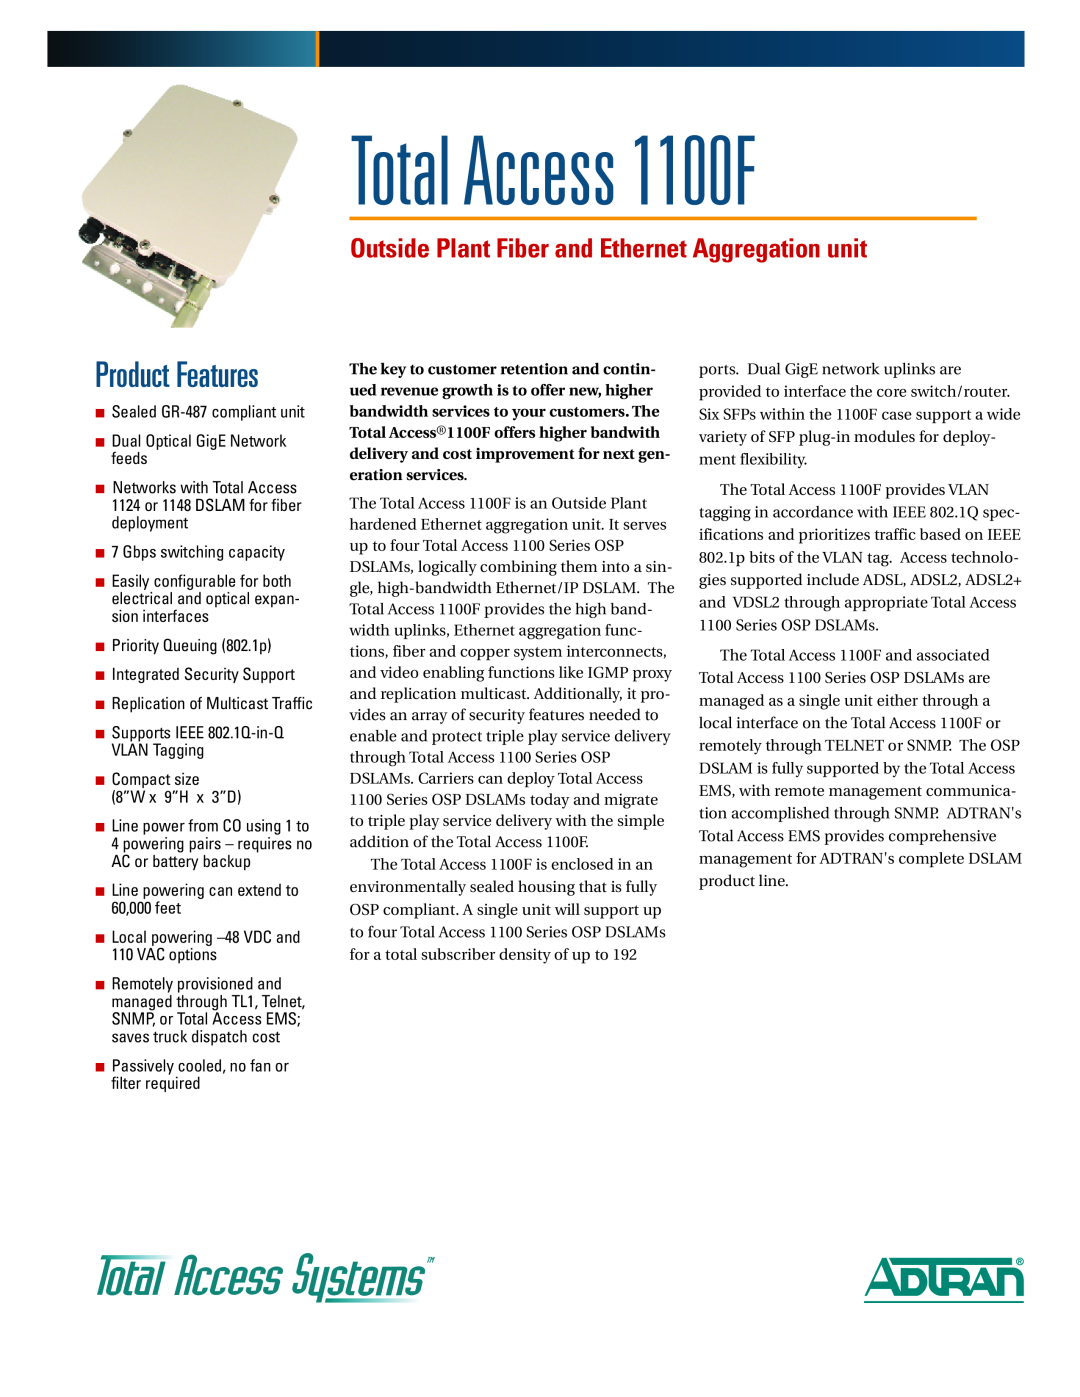 ADTRAN specifications Outside Plant Fiber and Ethernet Aggregation unit, Gbps switching capacity, Total Access 1100F 